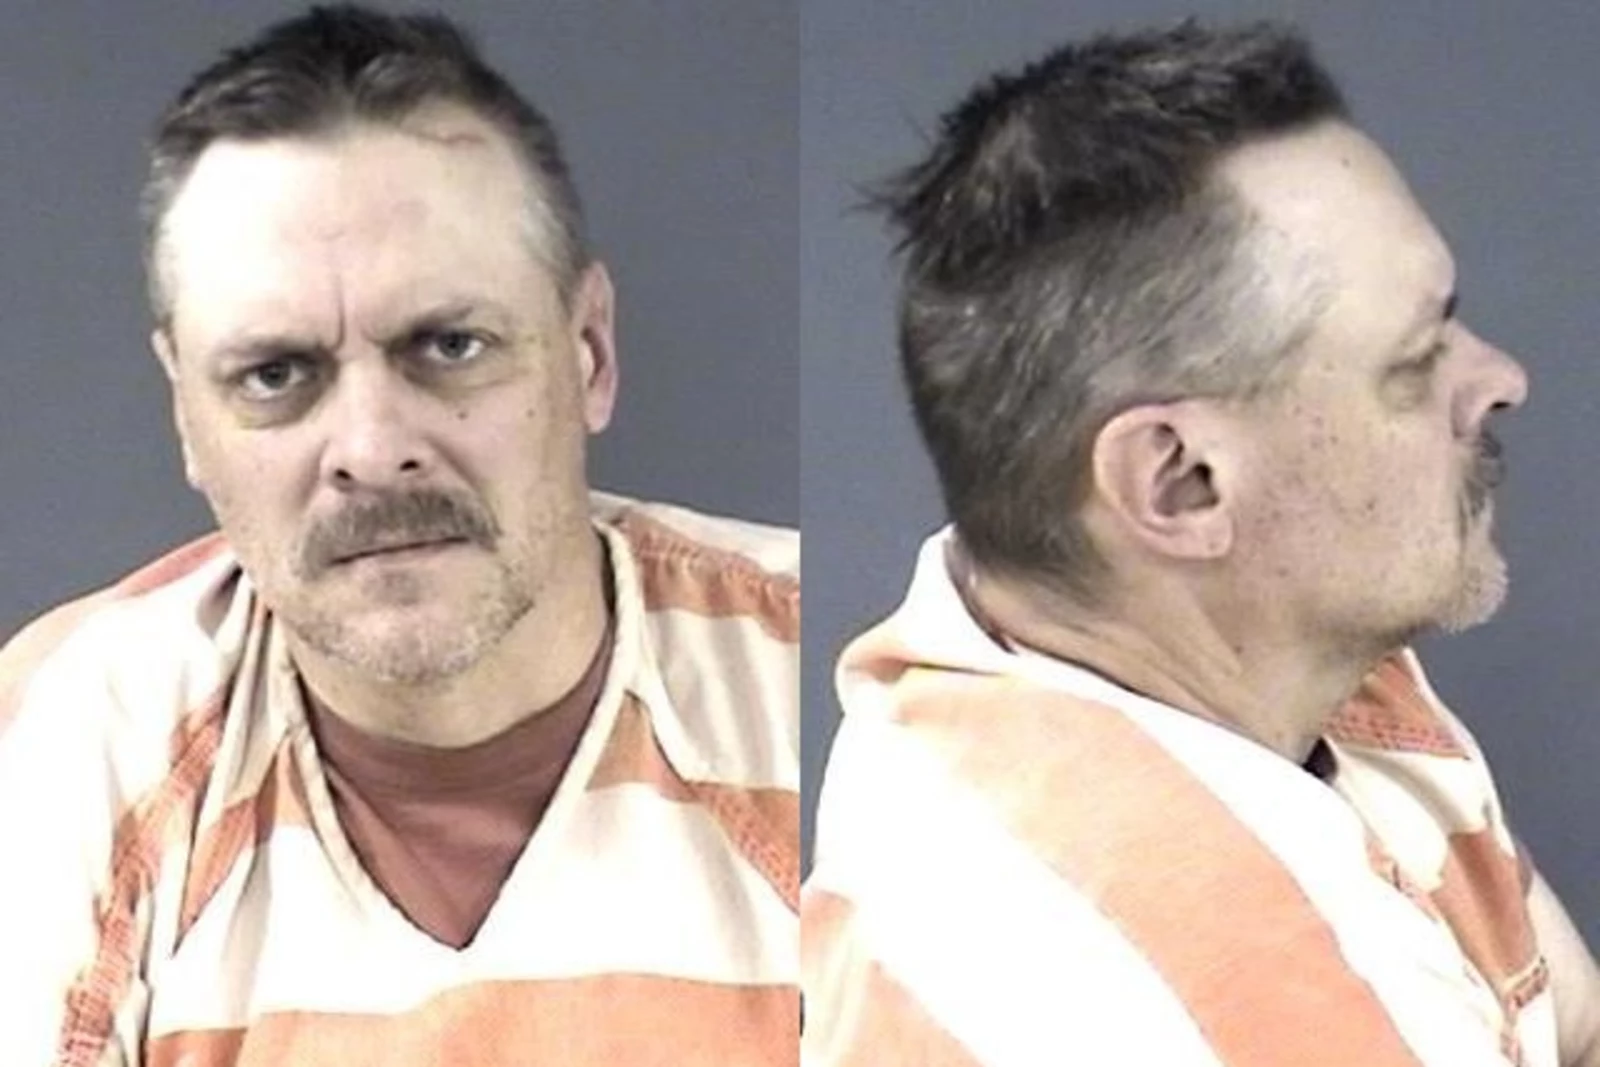 Cheyenne Man Gets 15 to 20 Years in 2020 Child Sex Abuse Case picture photo